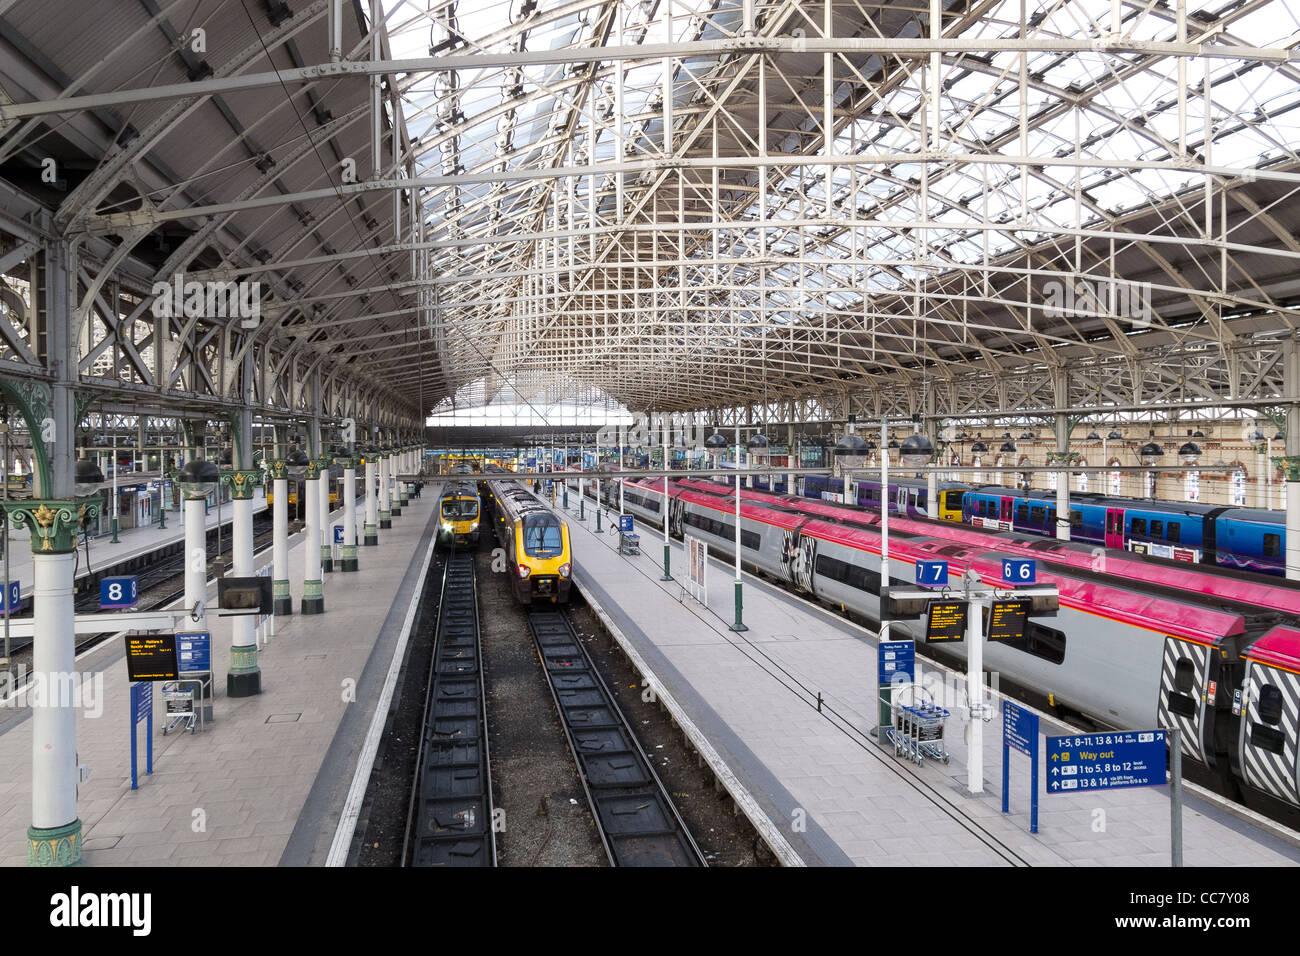 The interior of  Manchester Piccadilly Railway Station, UK, with Platforms and trains Stock Photo